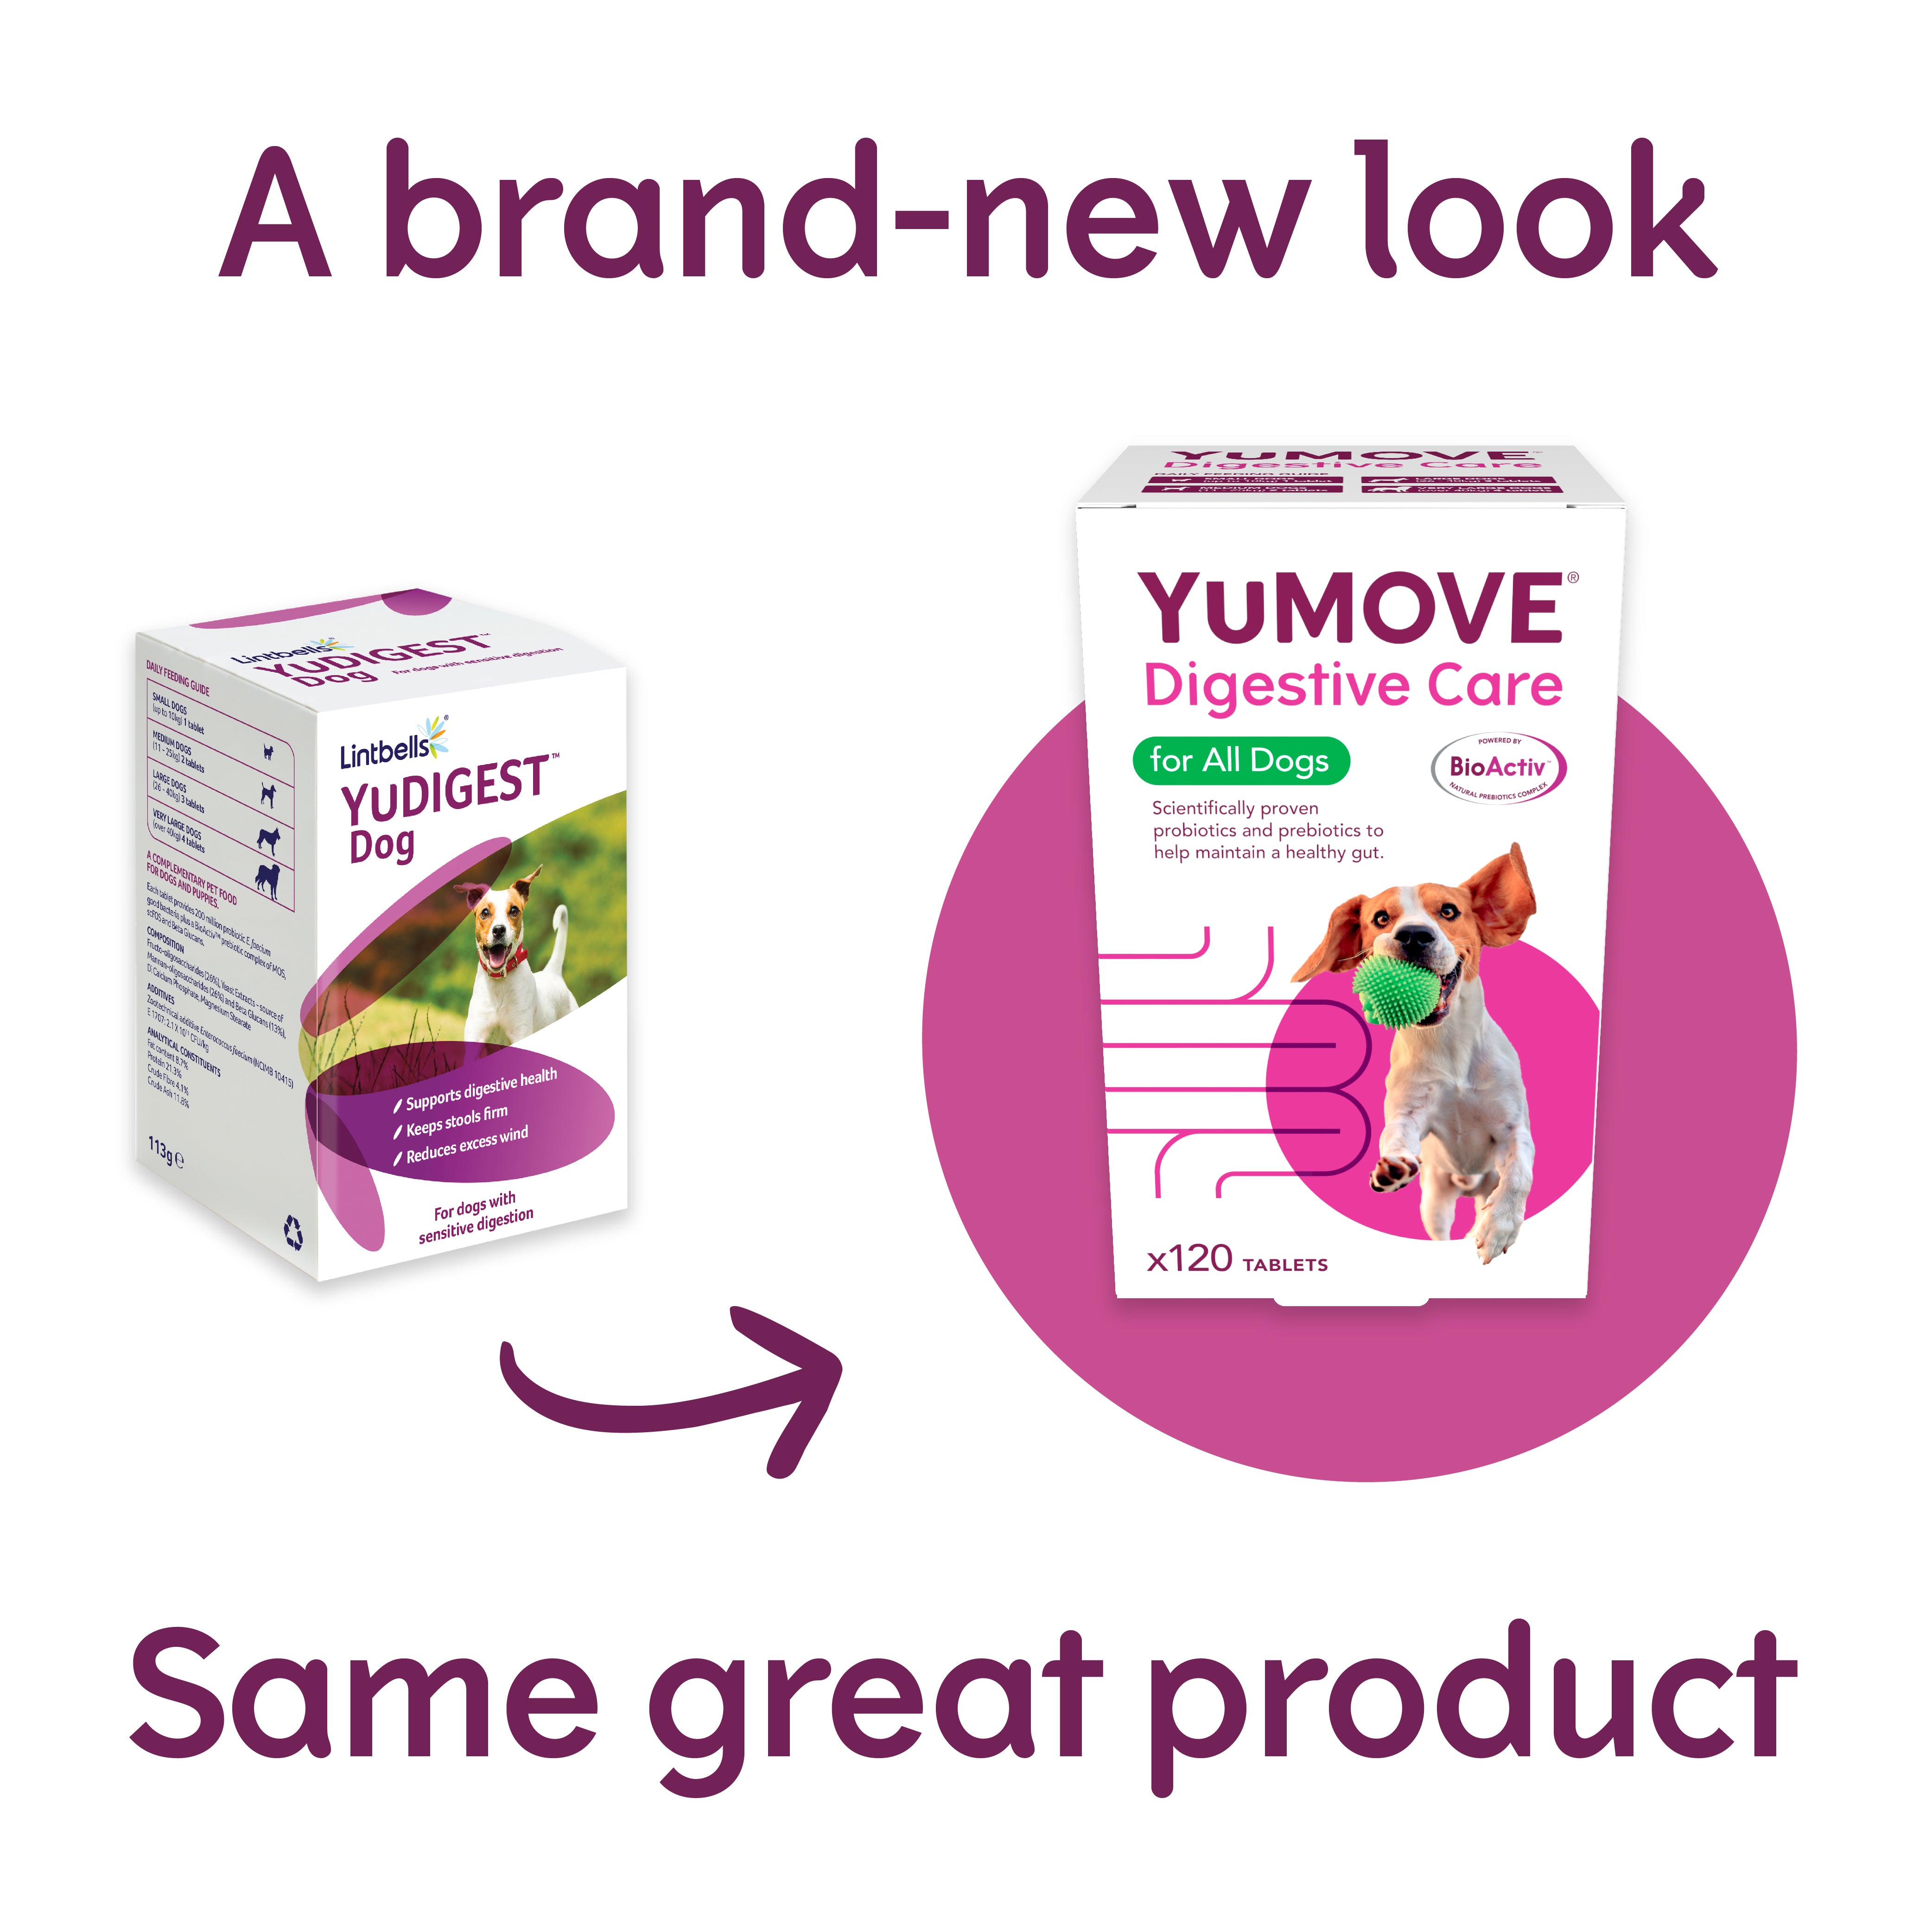 YuMOVE Digestive Care for All Dogs